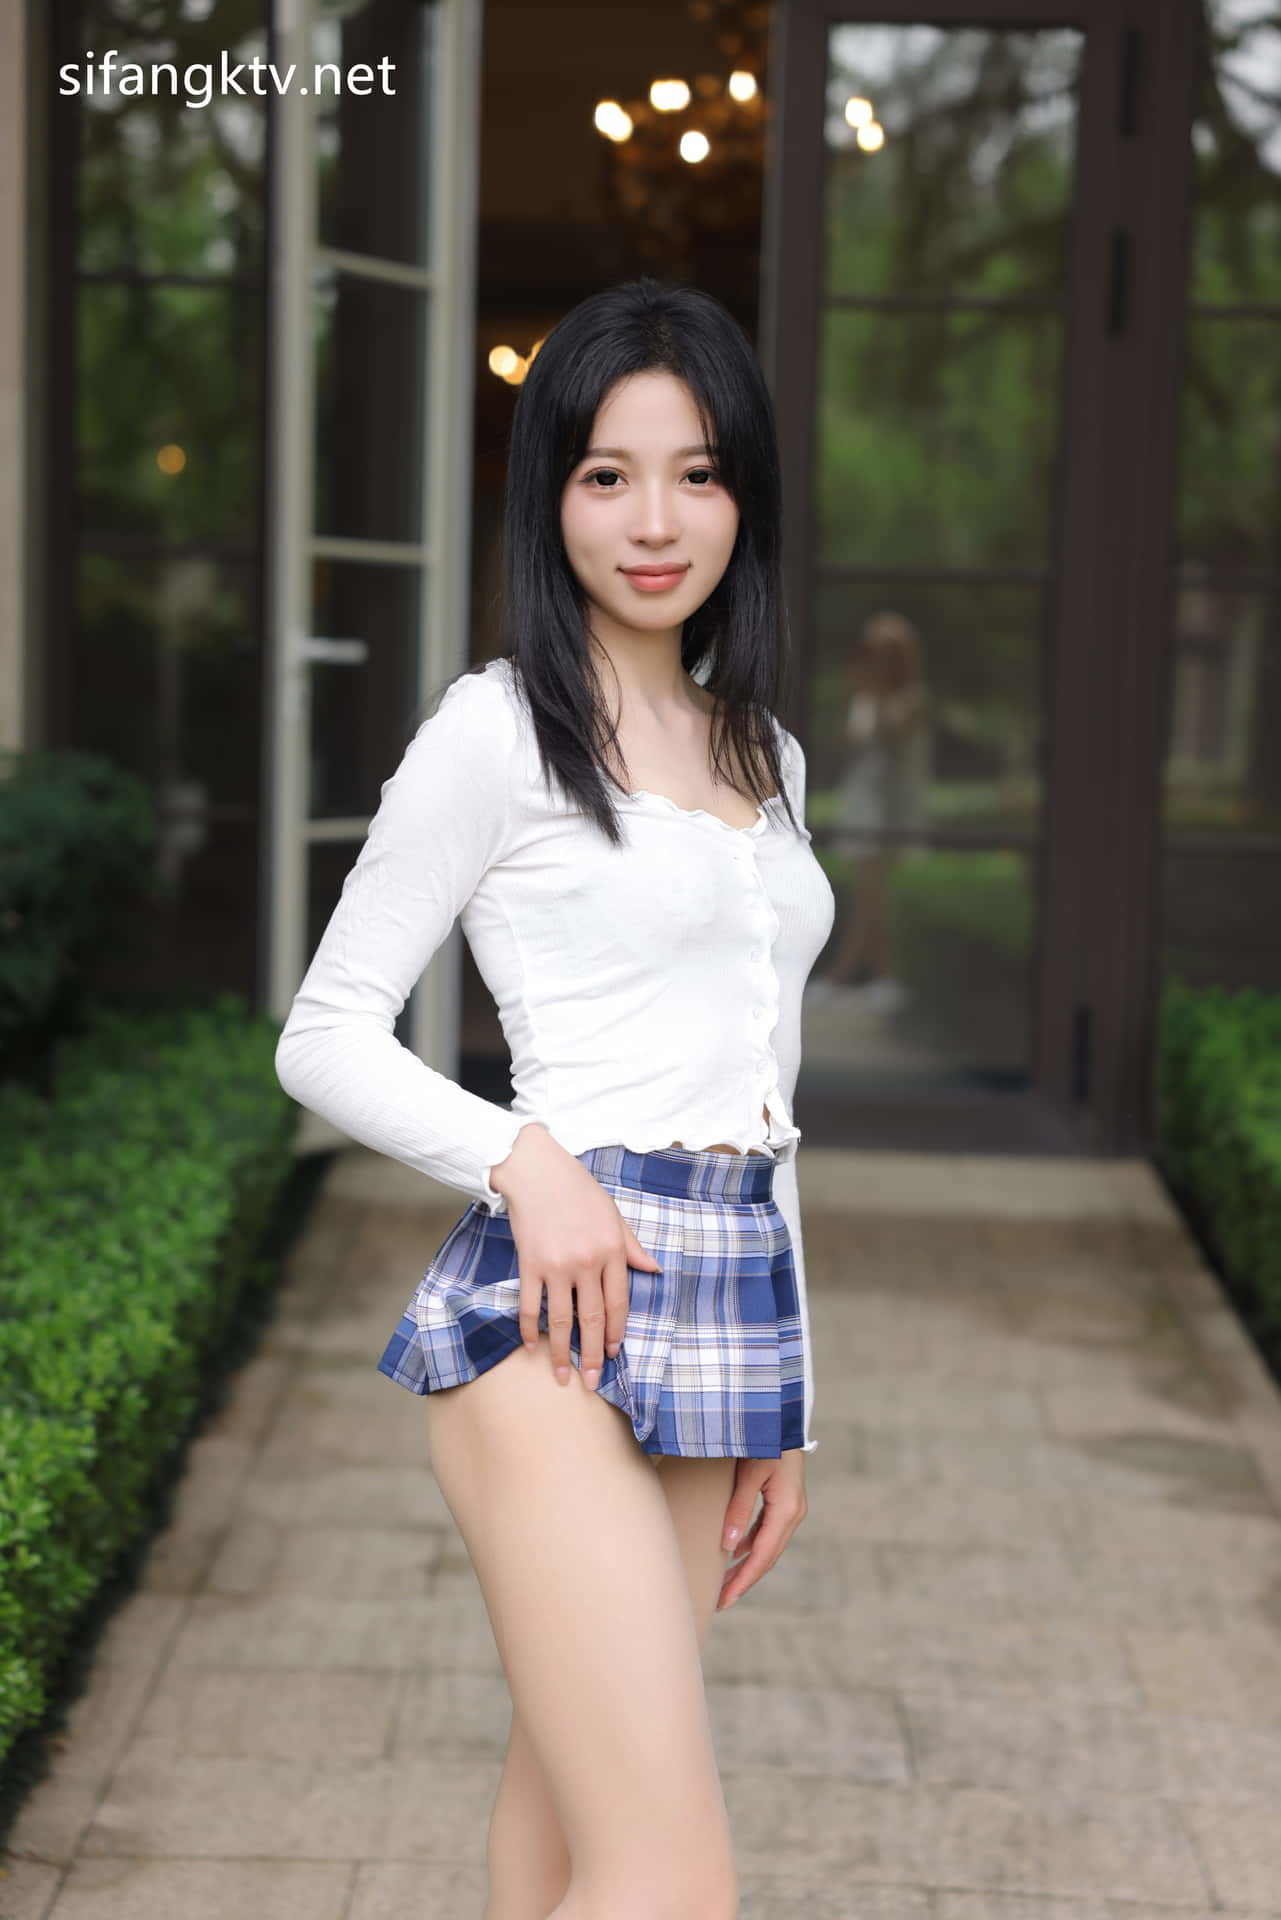 Xiuren.com model is the ultimate pure goddess [Jelly Bean] seductive private shot~ dew three points